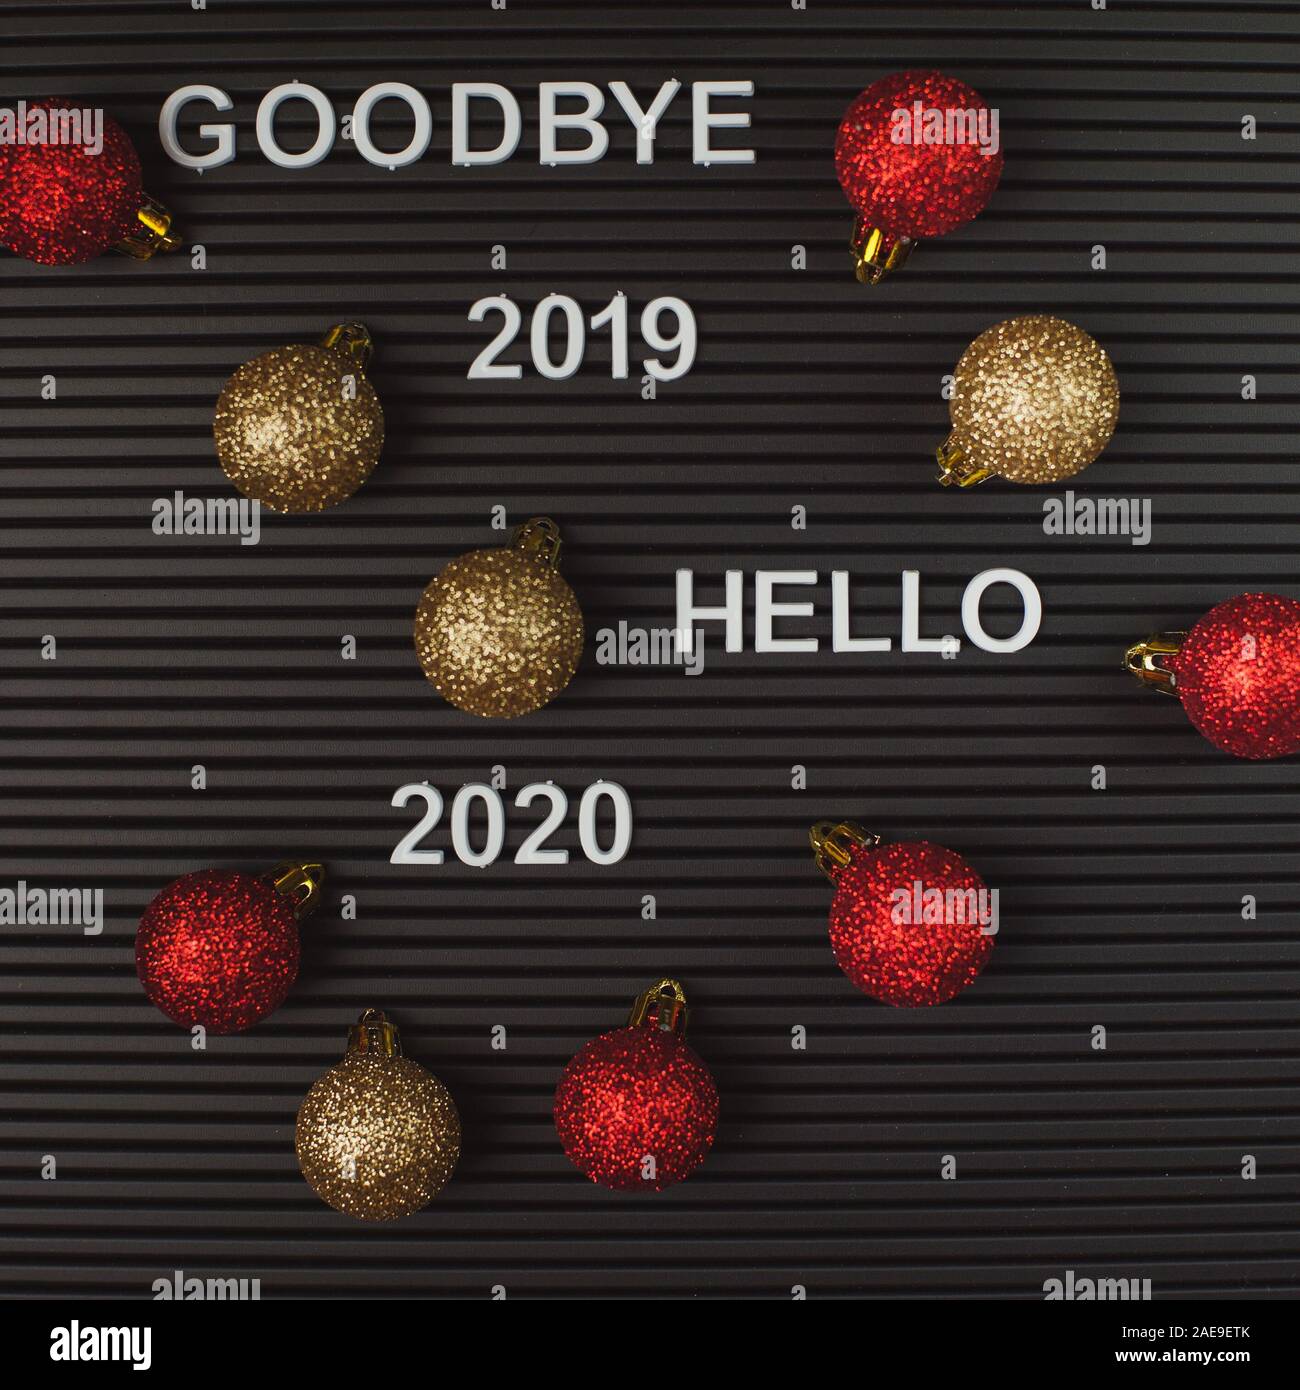 Good bye 2019 hello 2020 - text on mugshot letter board. Stock Photo